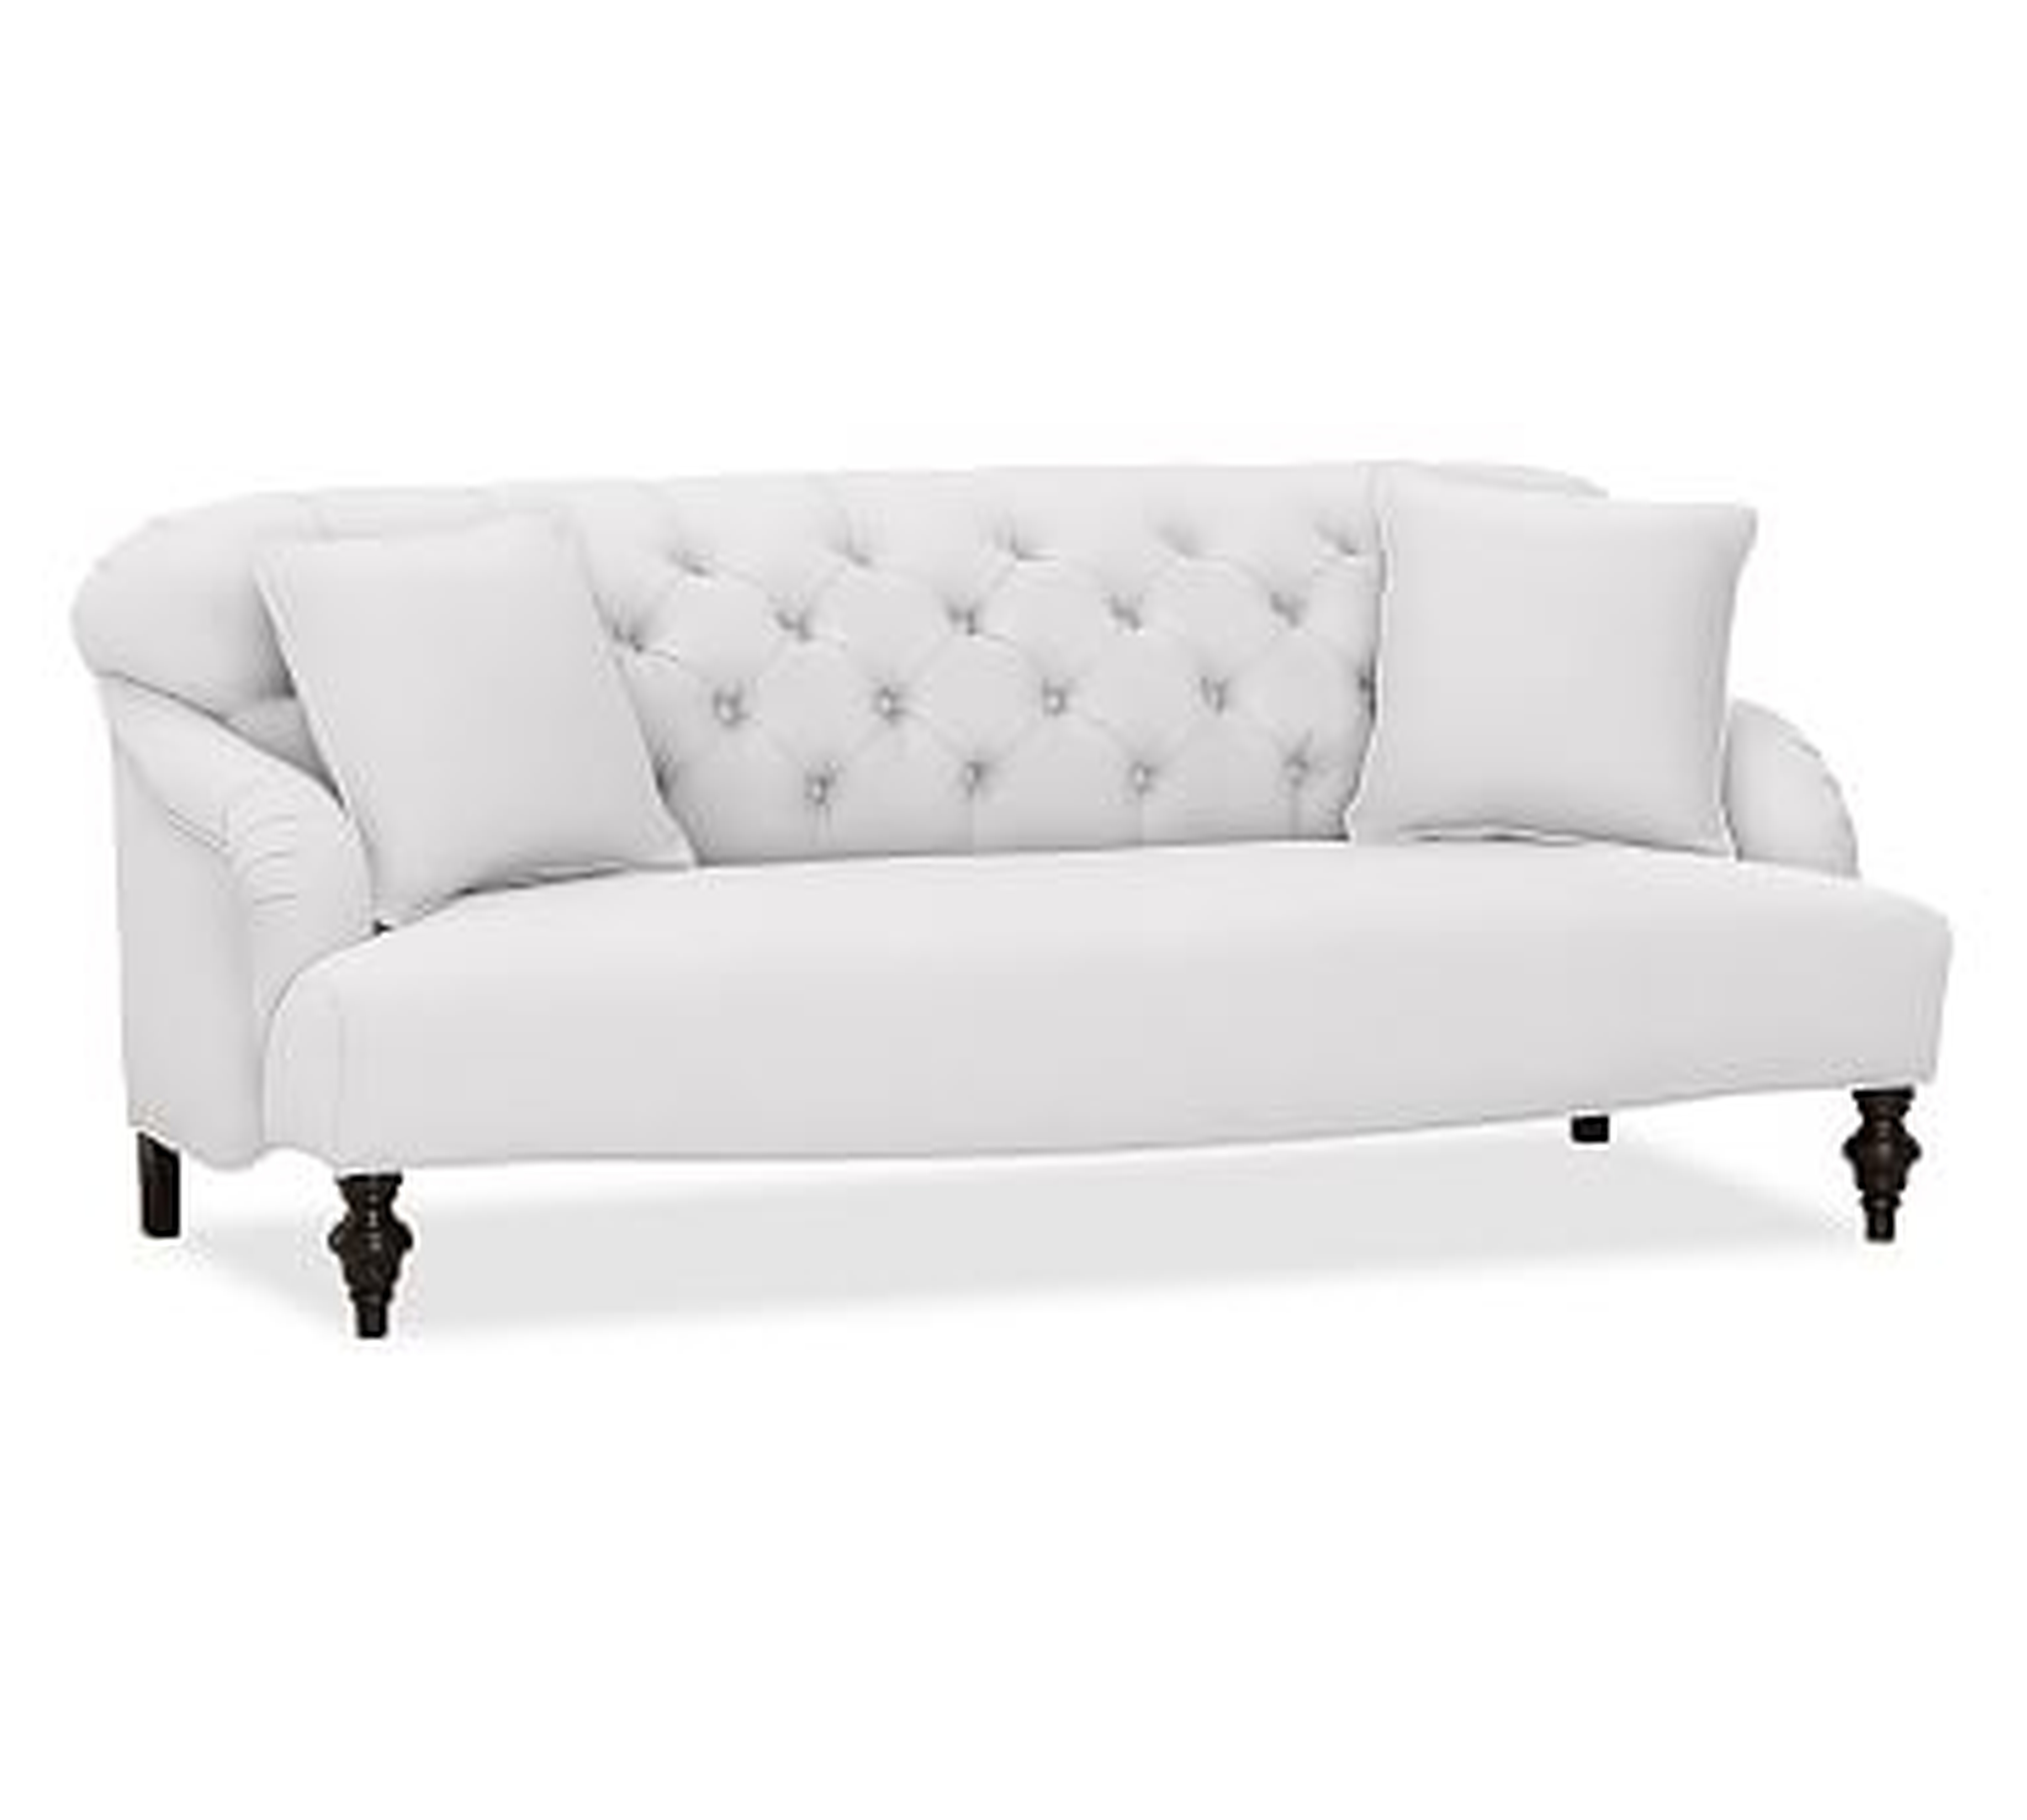 Clara Upholstered Apartment Sofa 75", Polyester Wrapped Cushions, Twill White - Pottery Barn